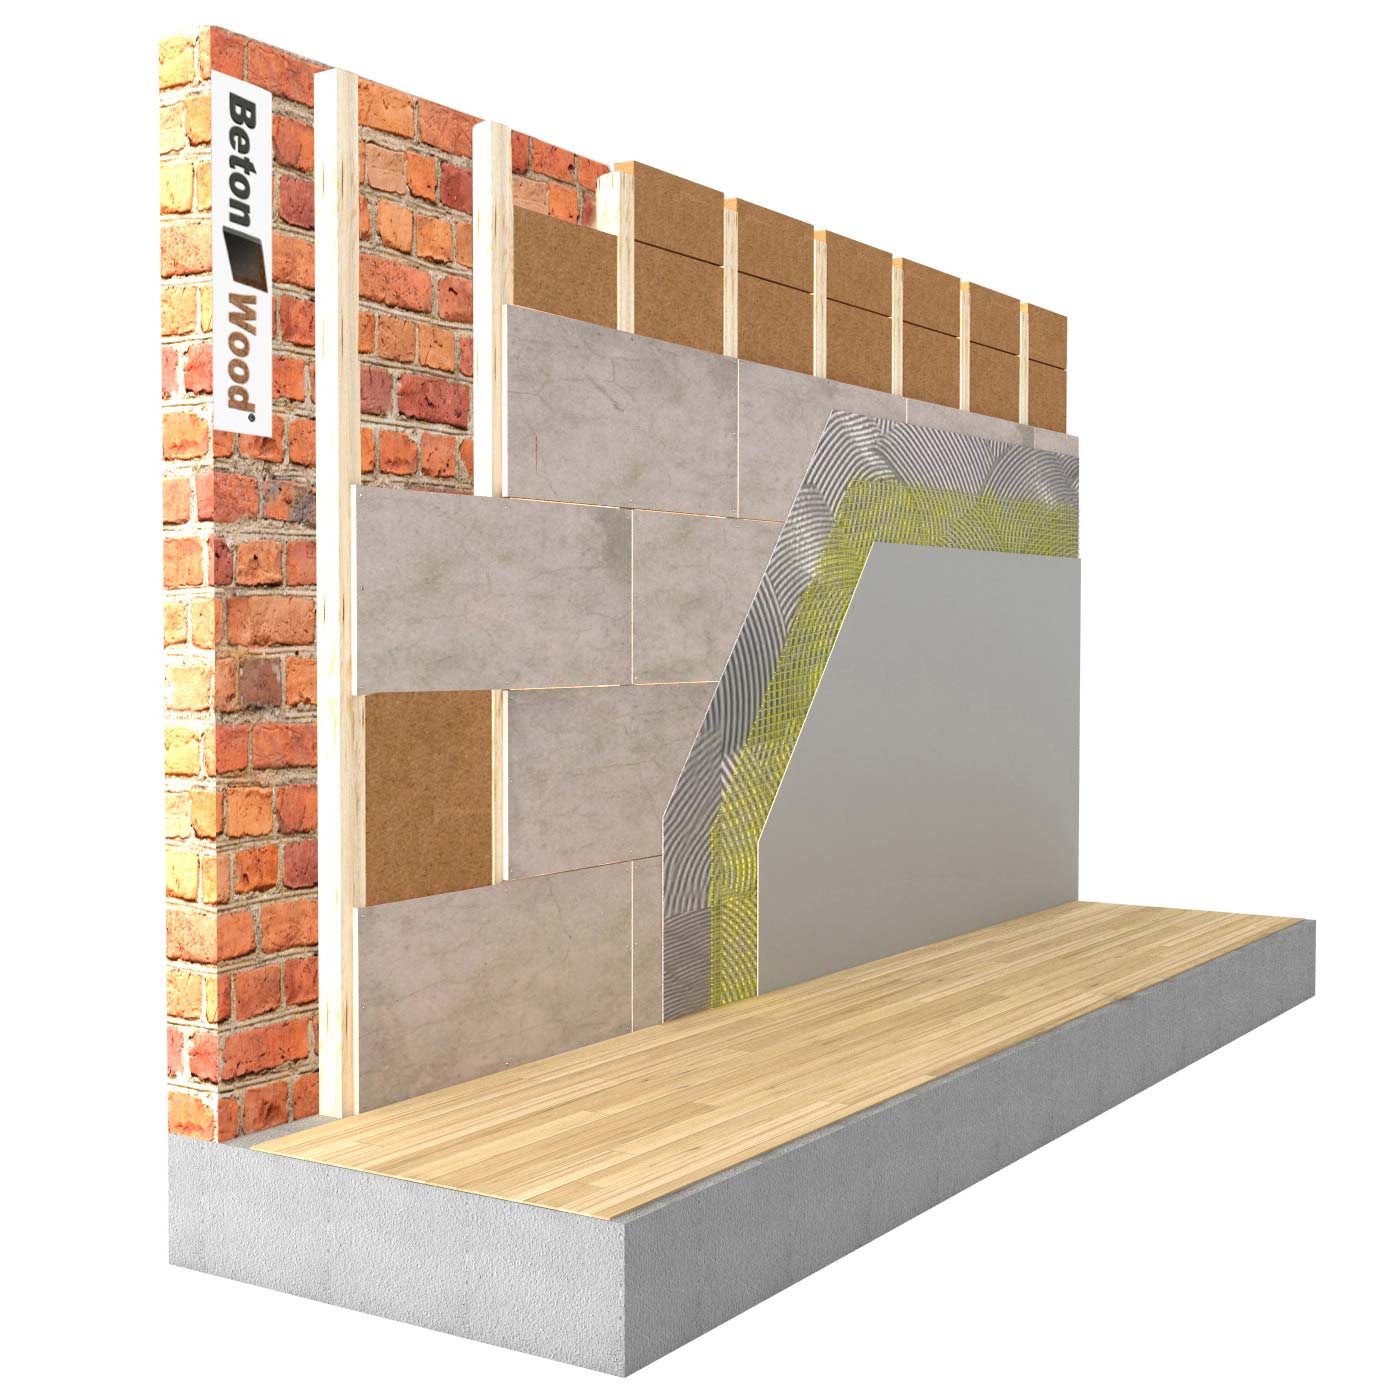 Internal insulation system in Protect dry Wood fiber and cement bonded particle board